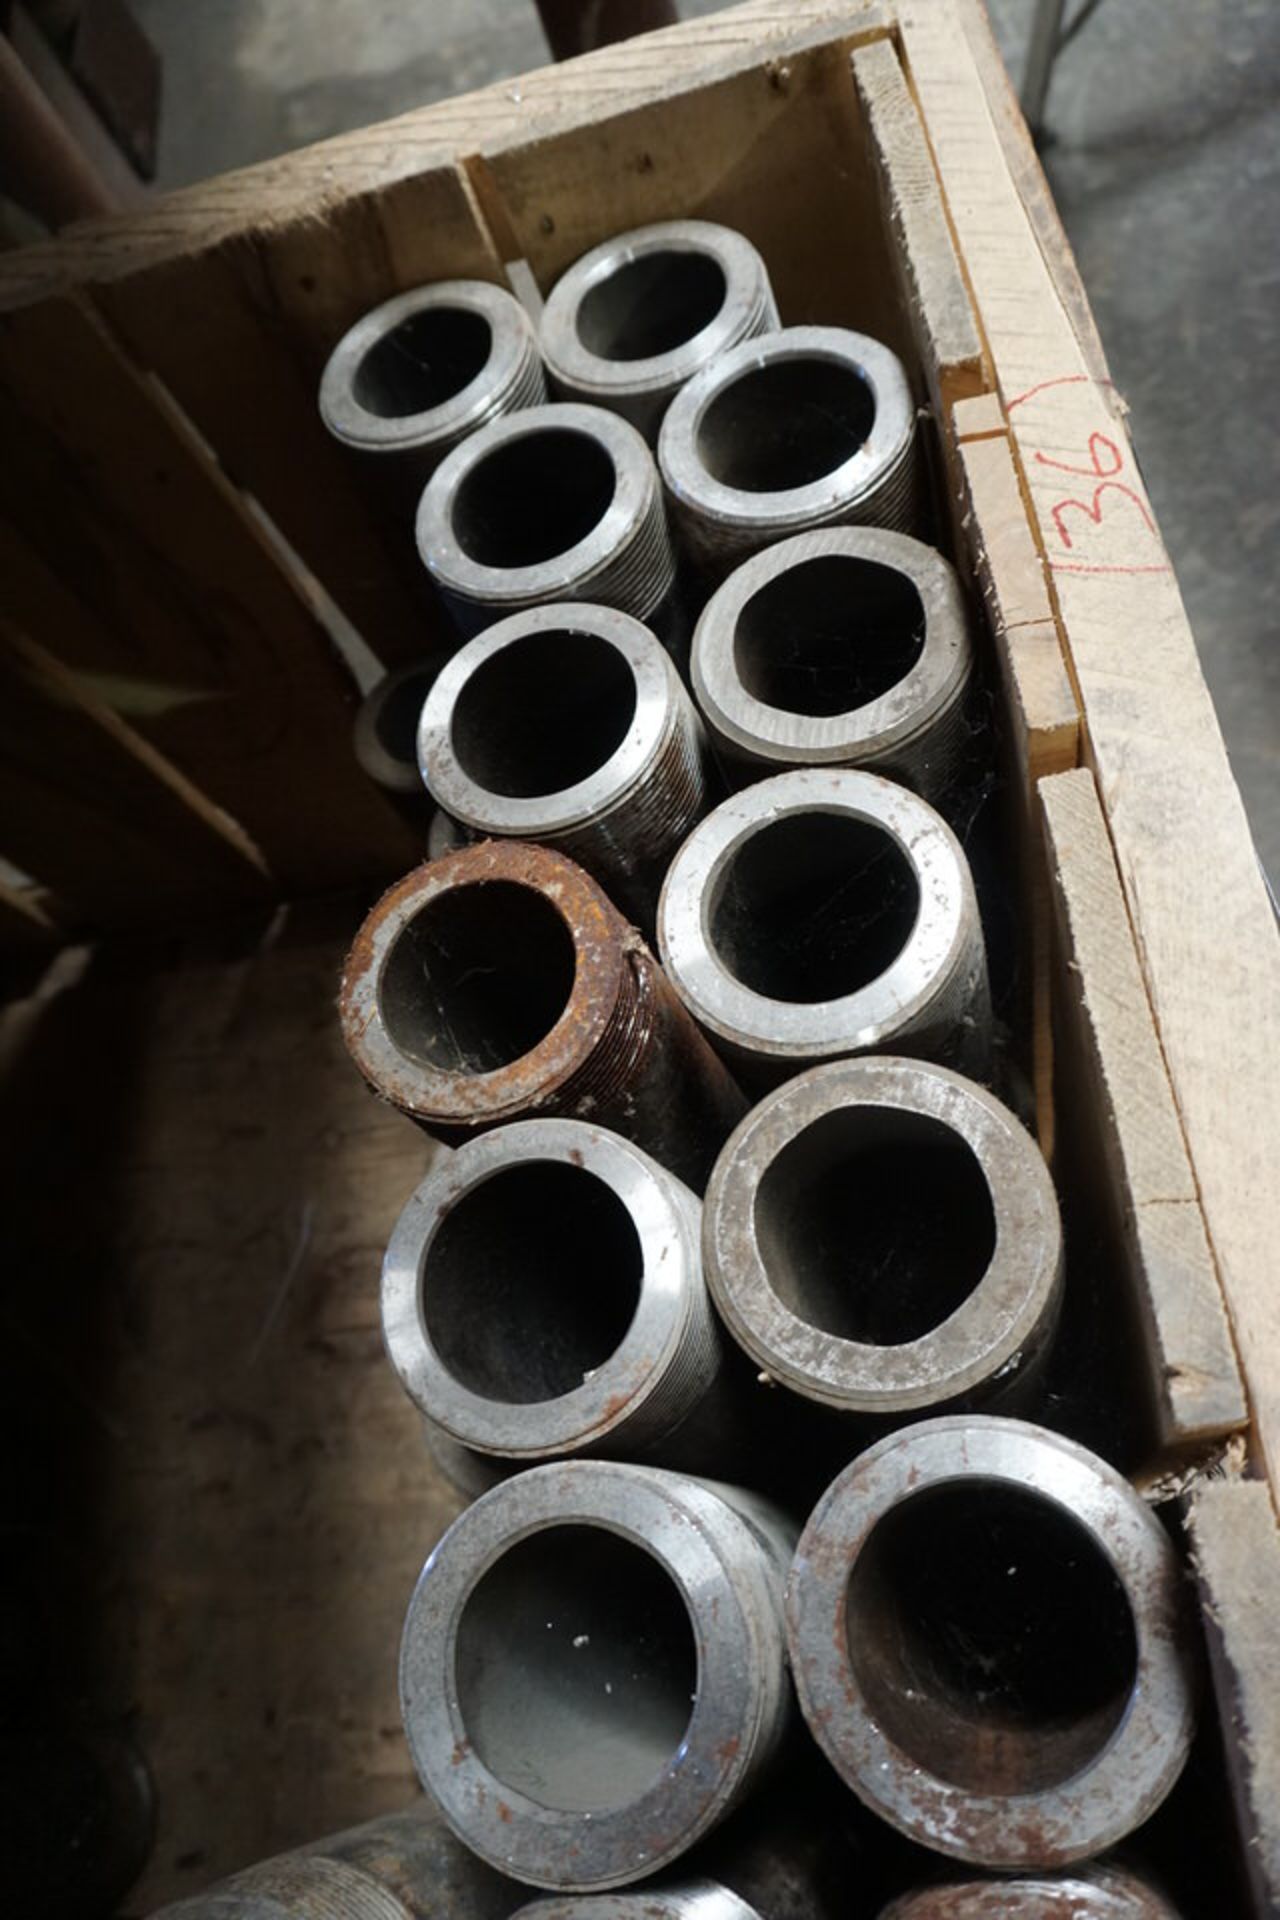 HEAVY WALL THREADED PIPE, 6" 8", 18" LG APPROX 80 PCS - Image 3 of 3